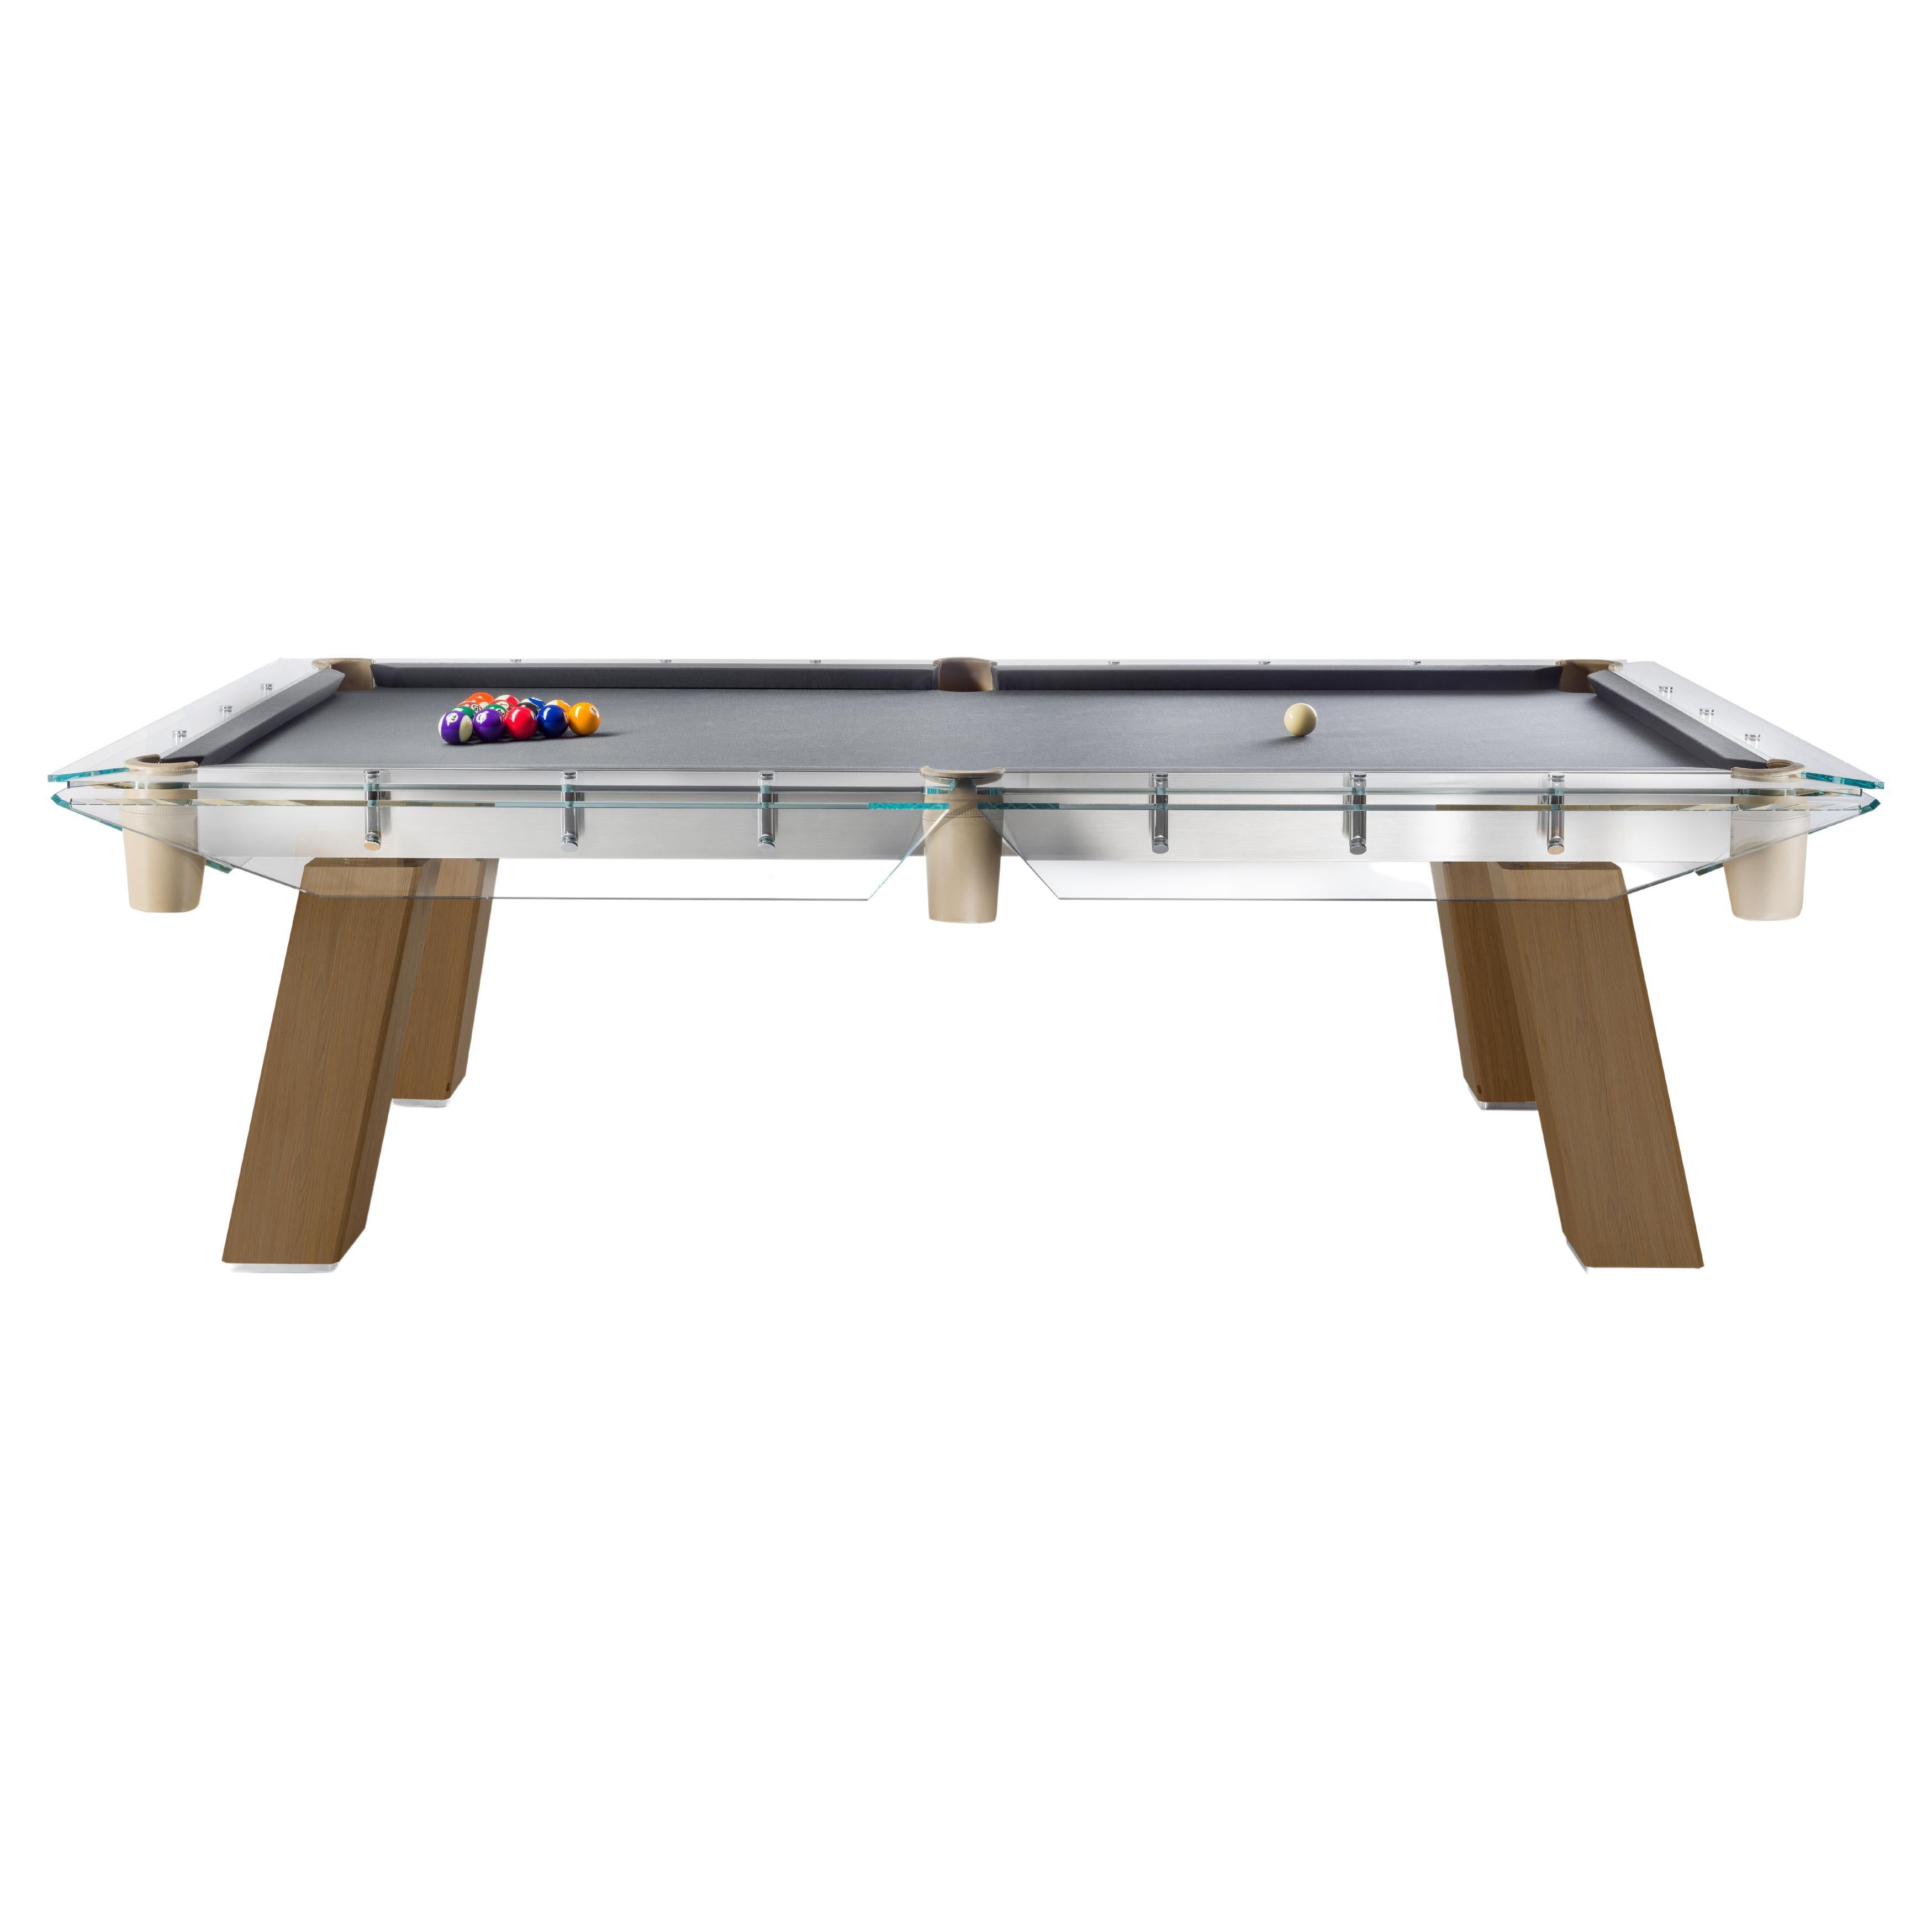 Filotto Wood Brown Oak Player Pool Table by Impatia